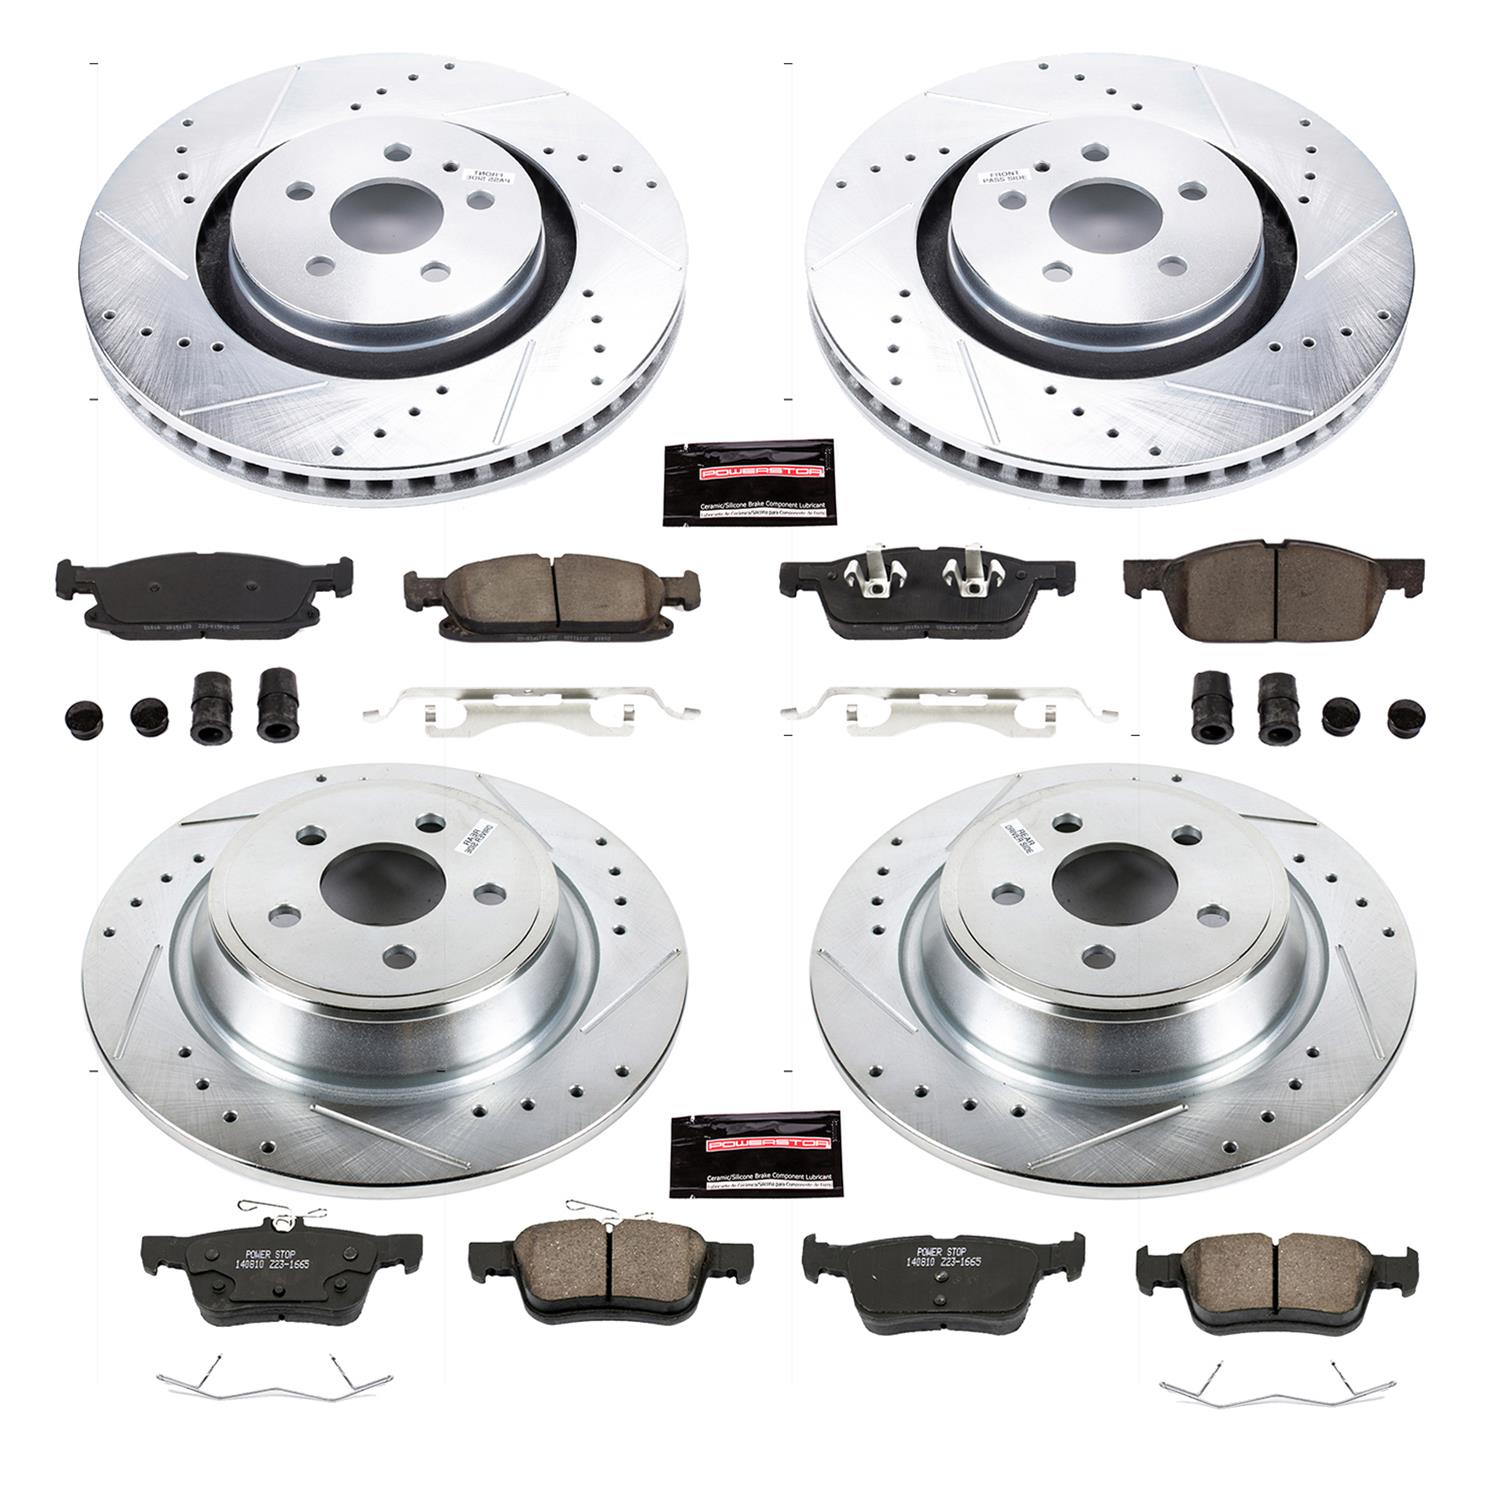 K5958 Powerstop 4-Wheel Set Brake Disc and Pad Kits Front & Rear New for Jeep 